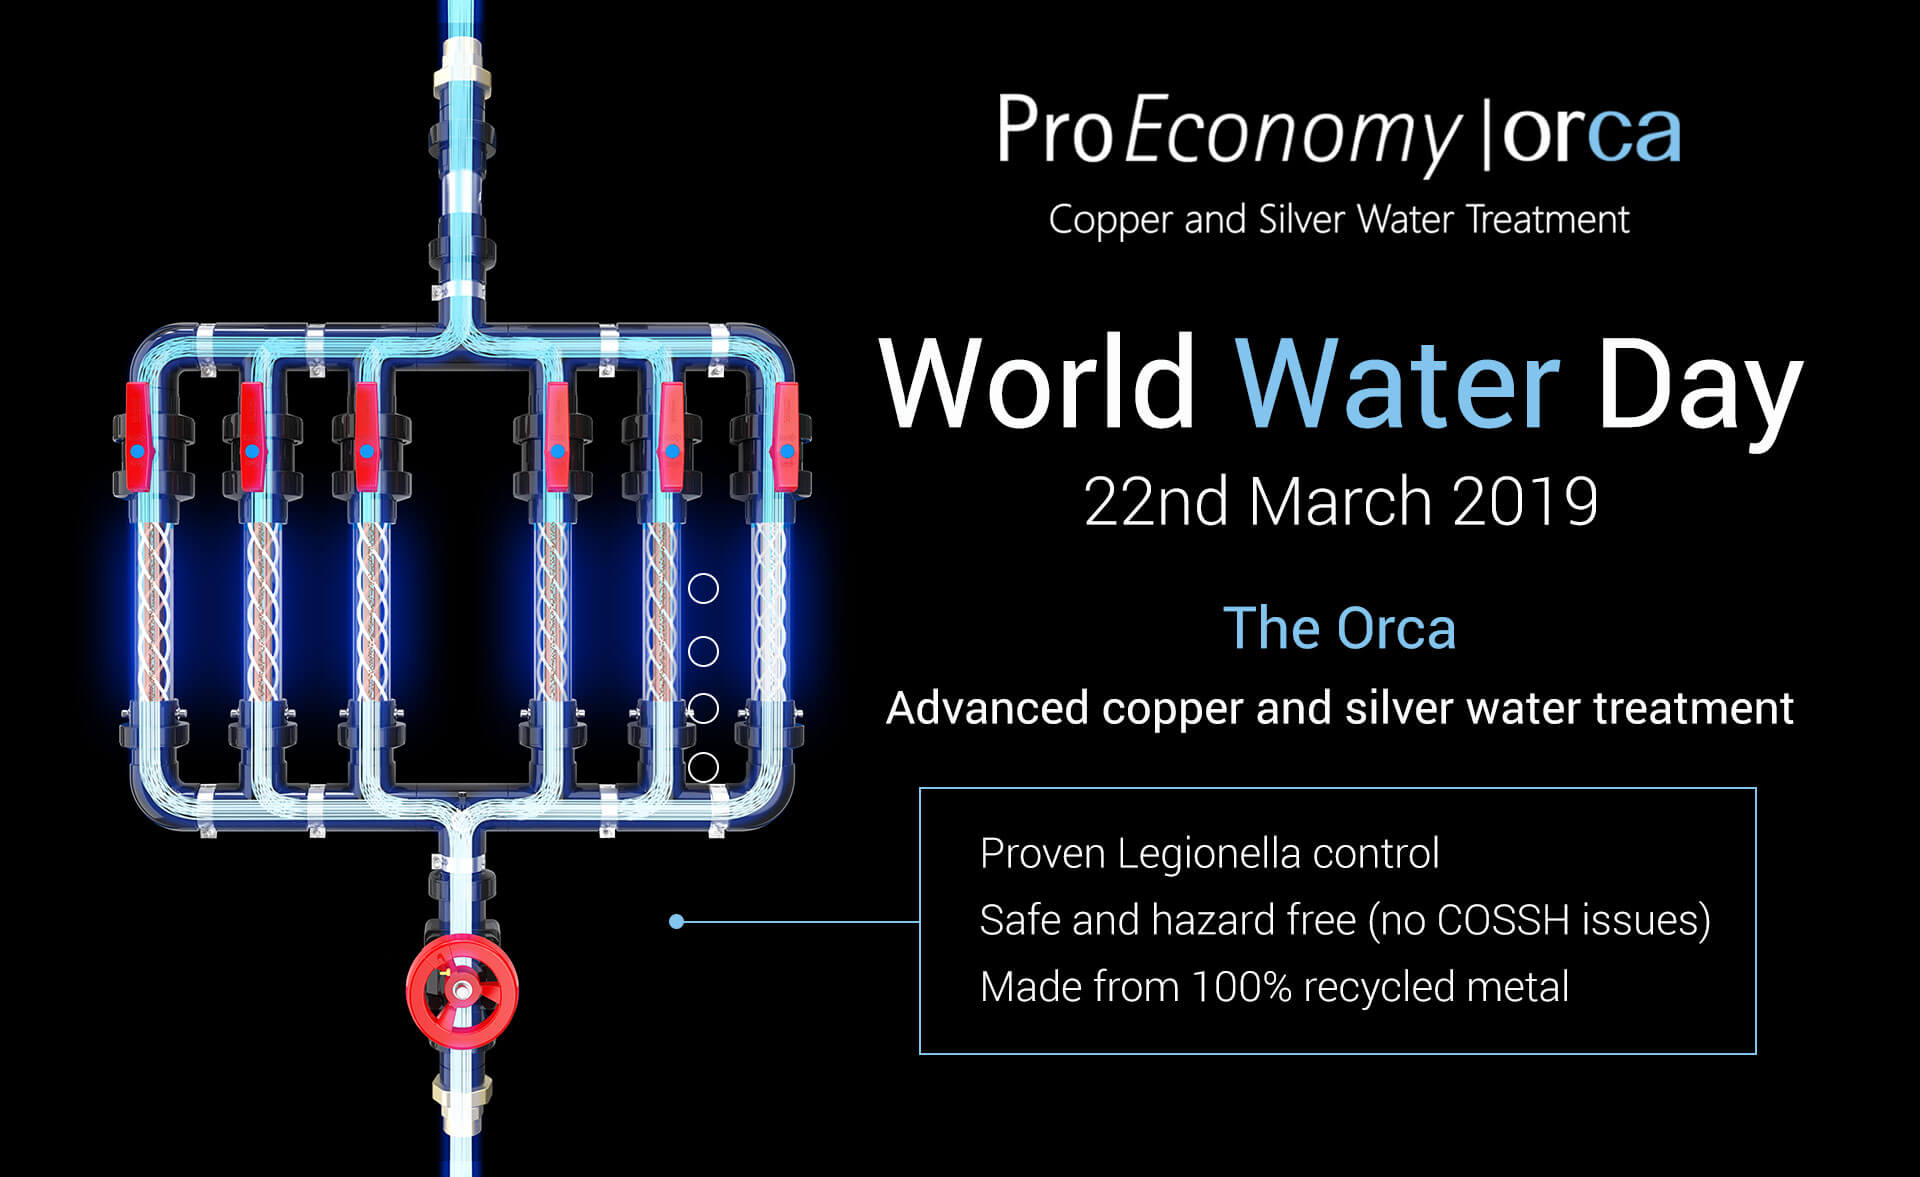 proeconomy and world water day 2019